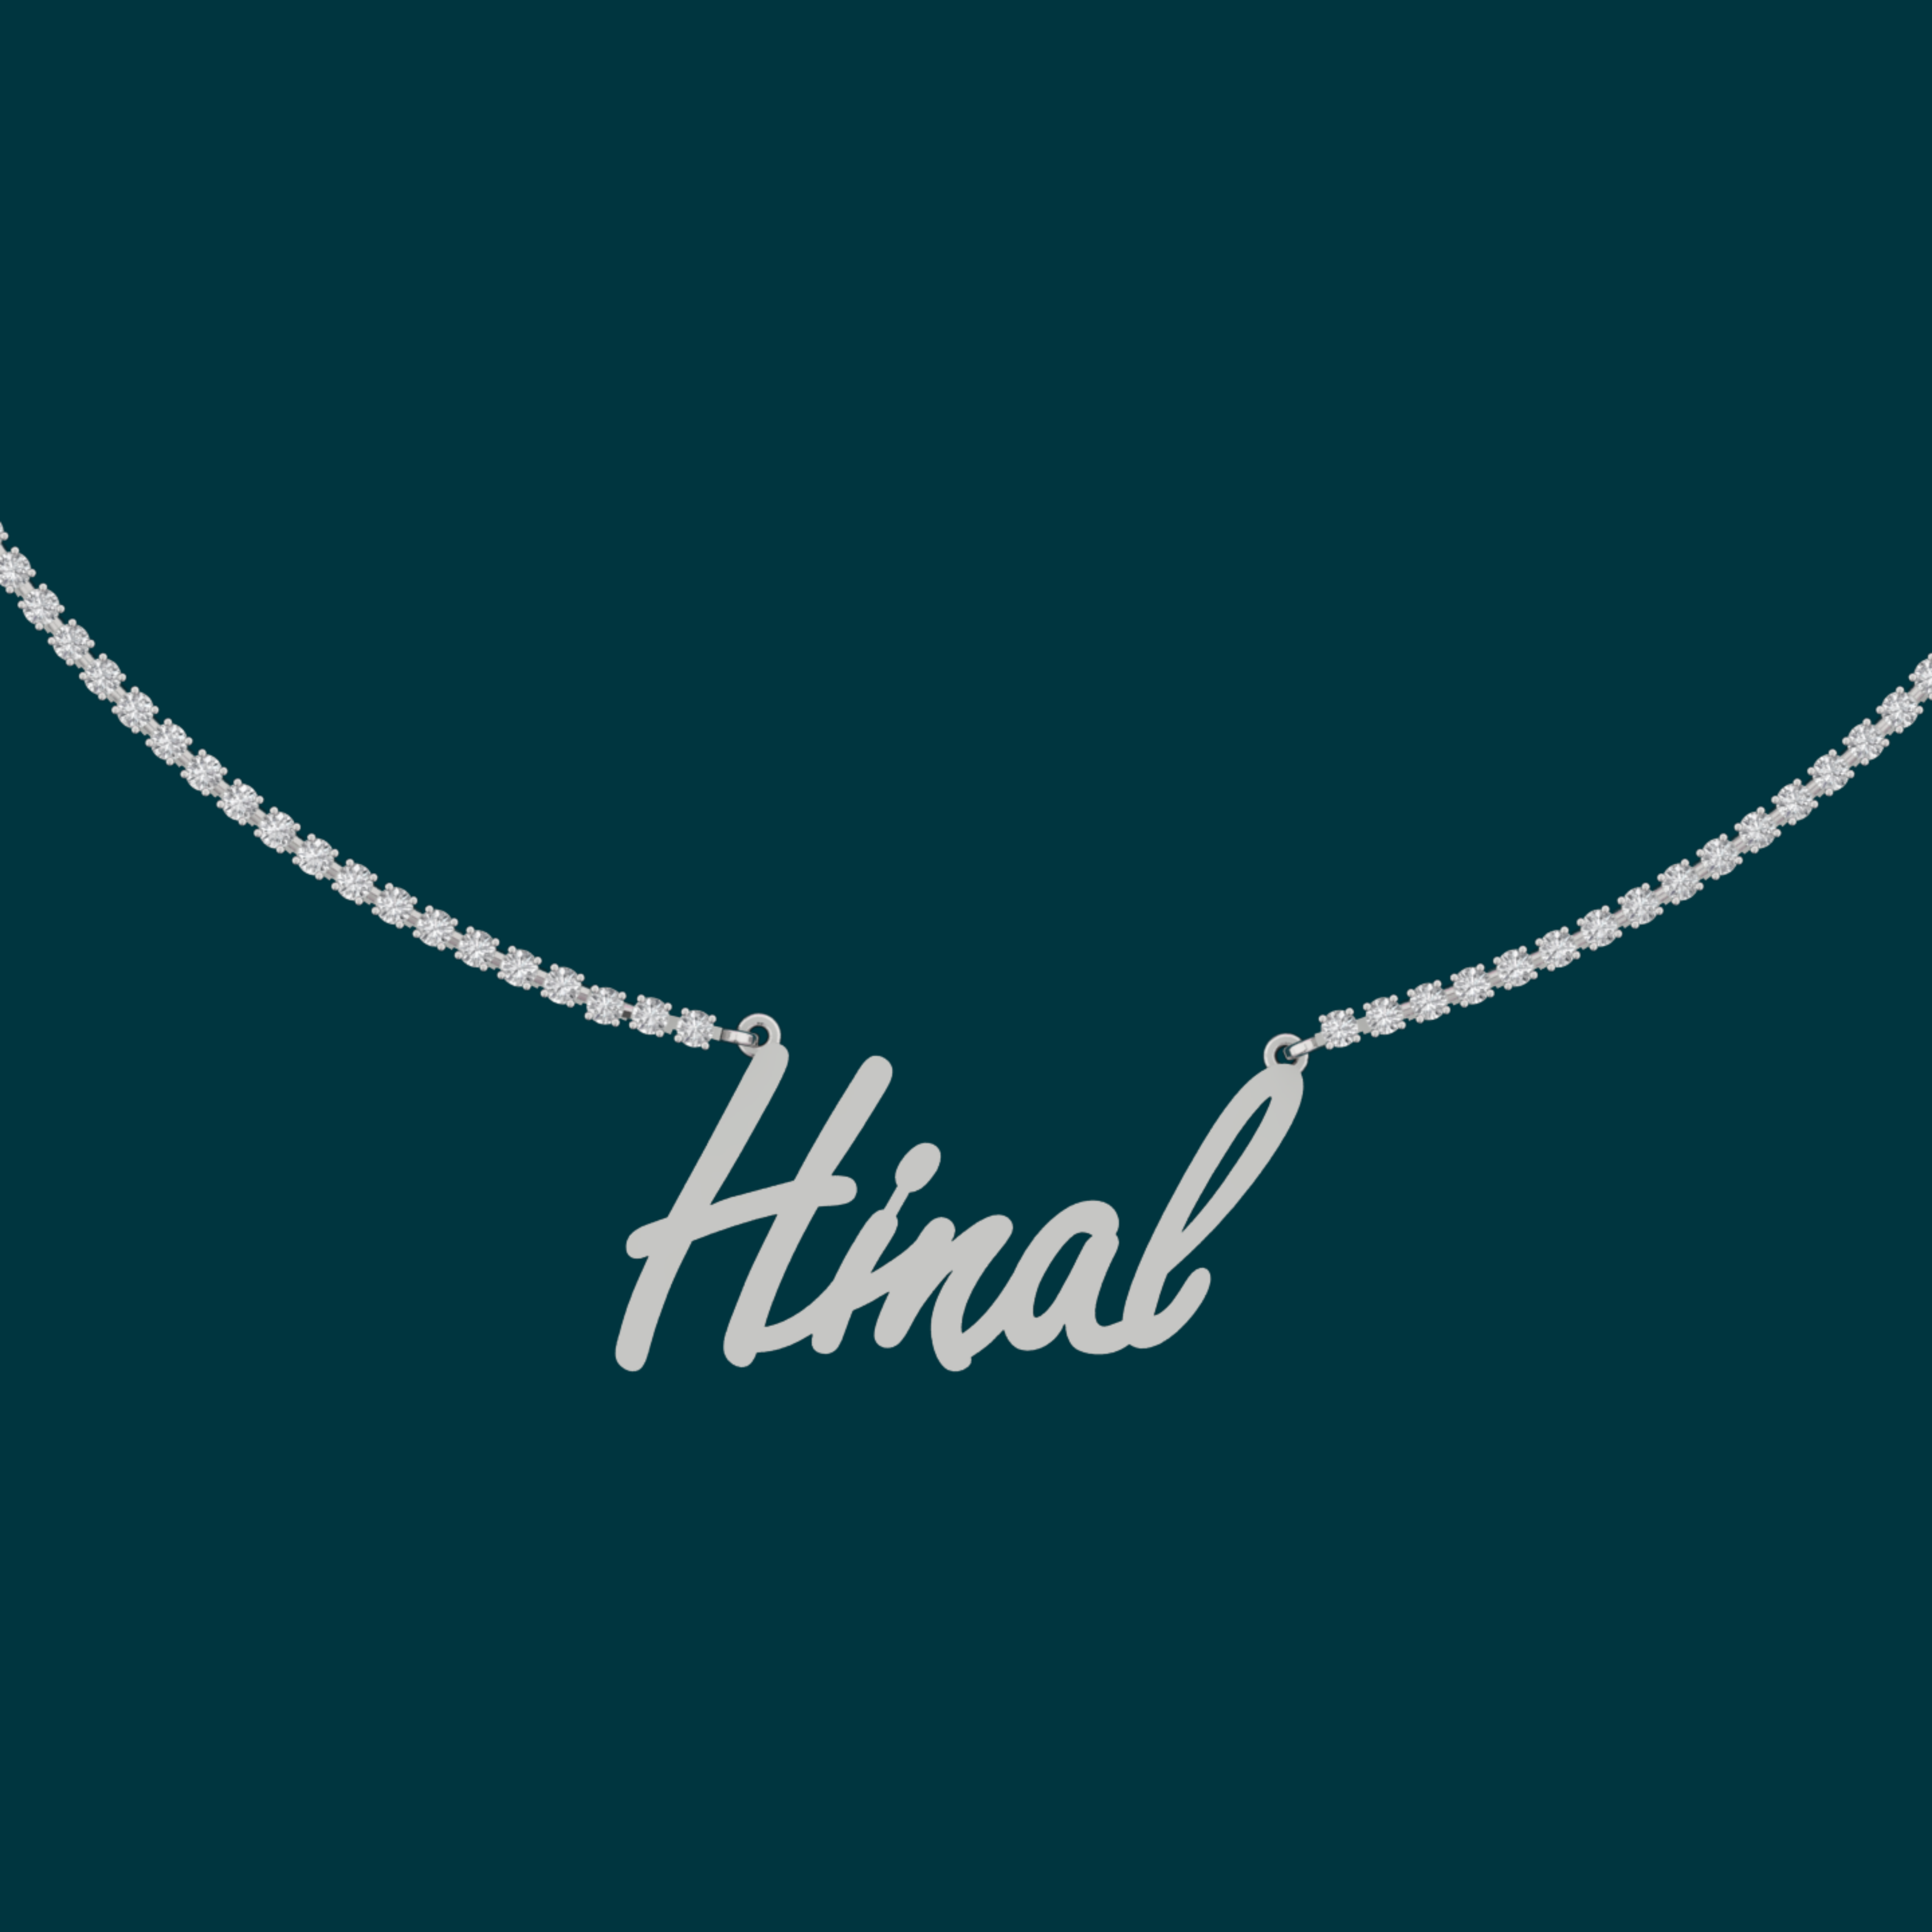 92.5 sterling silver custom hubby/ baby name Customized Pendant with chain/ Moissanite Handmade Special Name band /long distance promise gift for love/ Special one person name Pendant with chain/ minimalist pendant chain